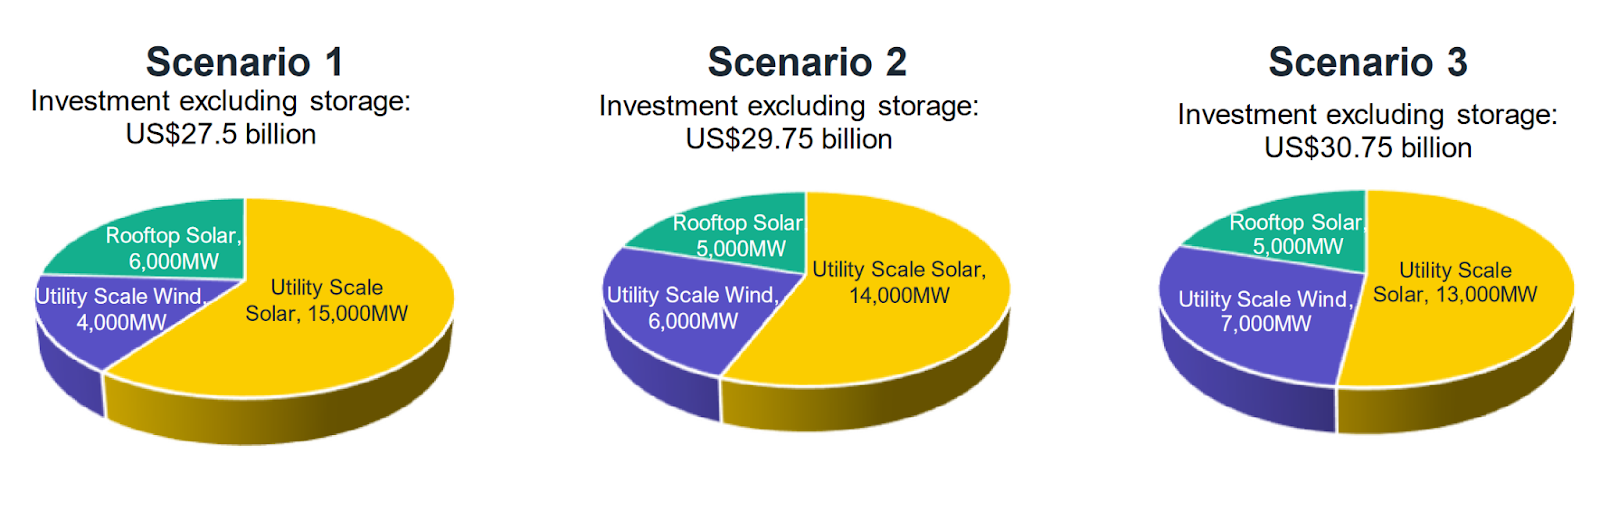 Investment Requirement to Reach 40% Renewable Energy Target, Source: IEEFA